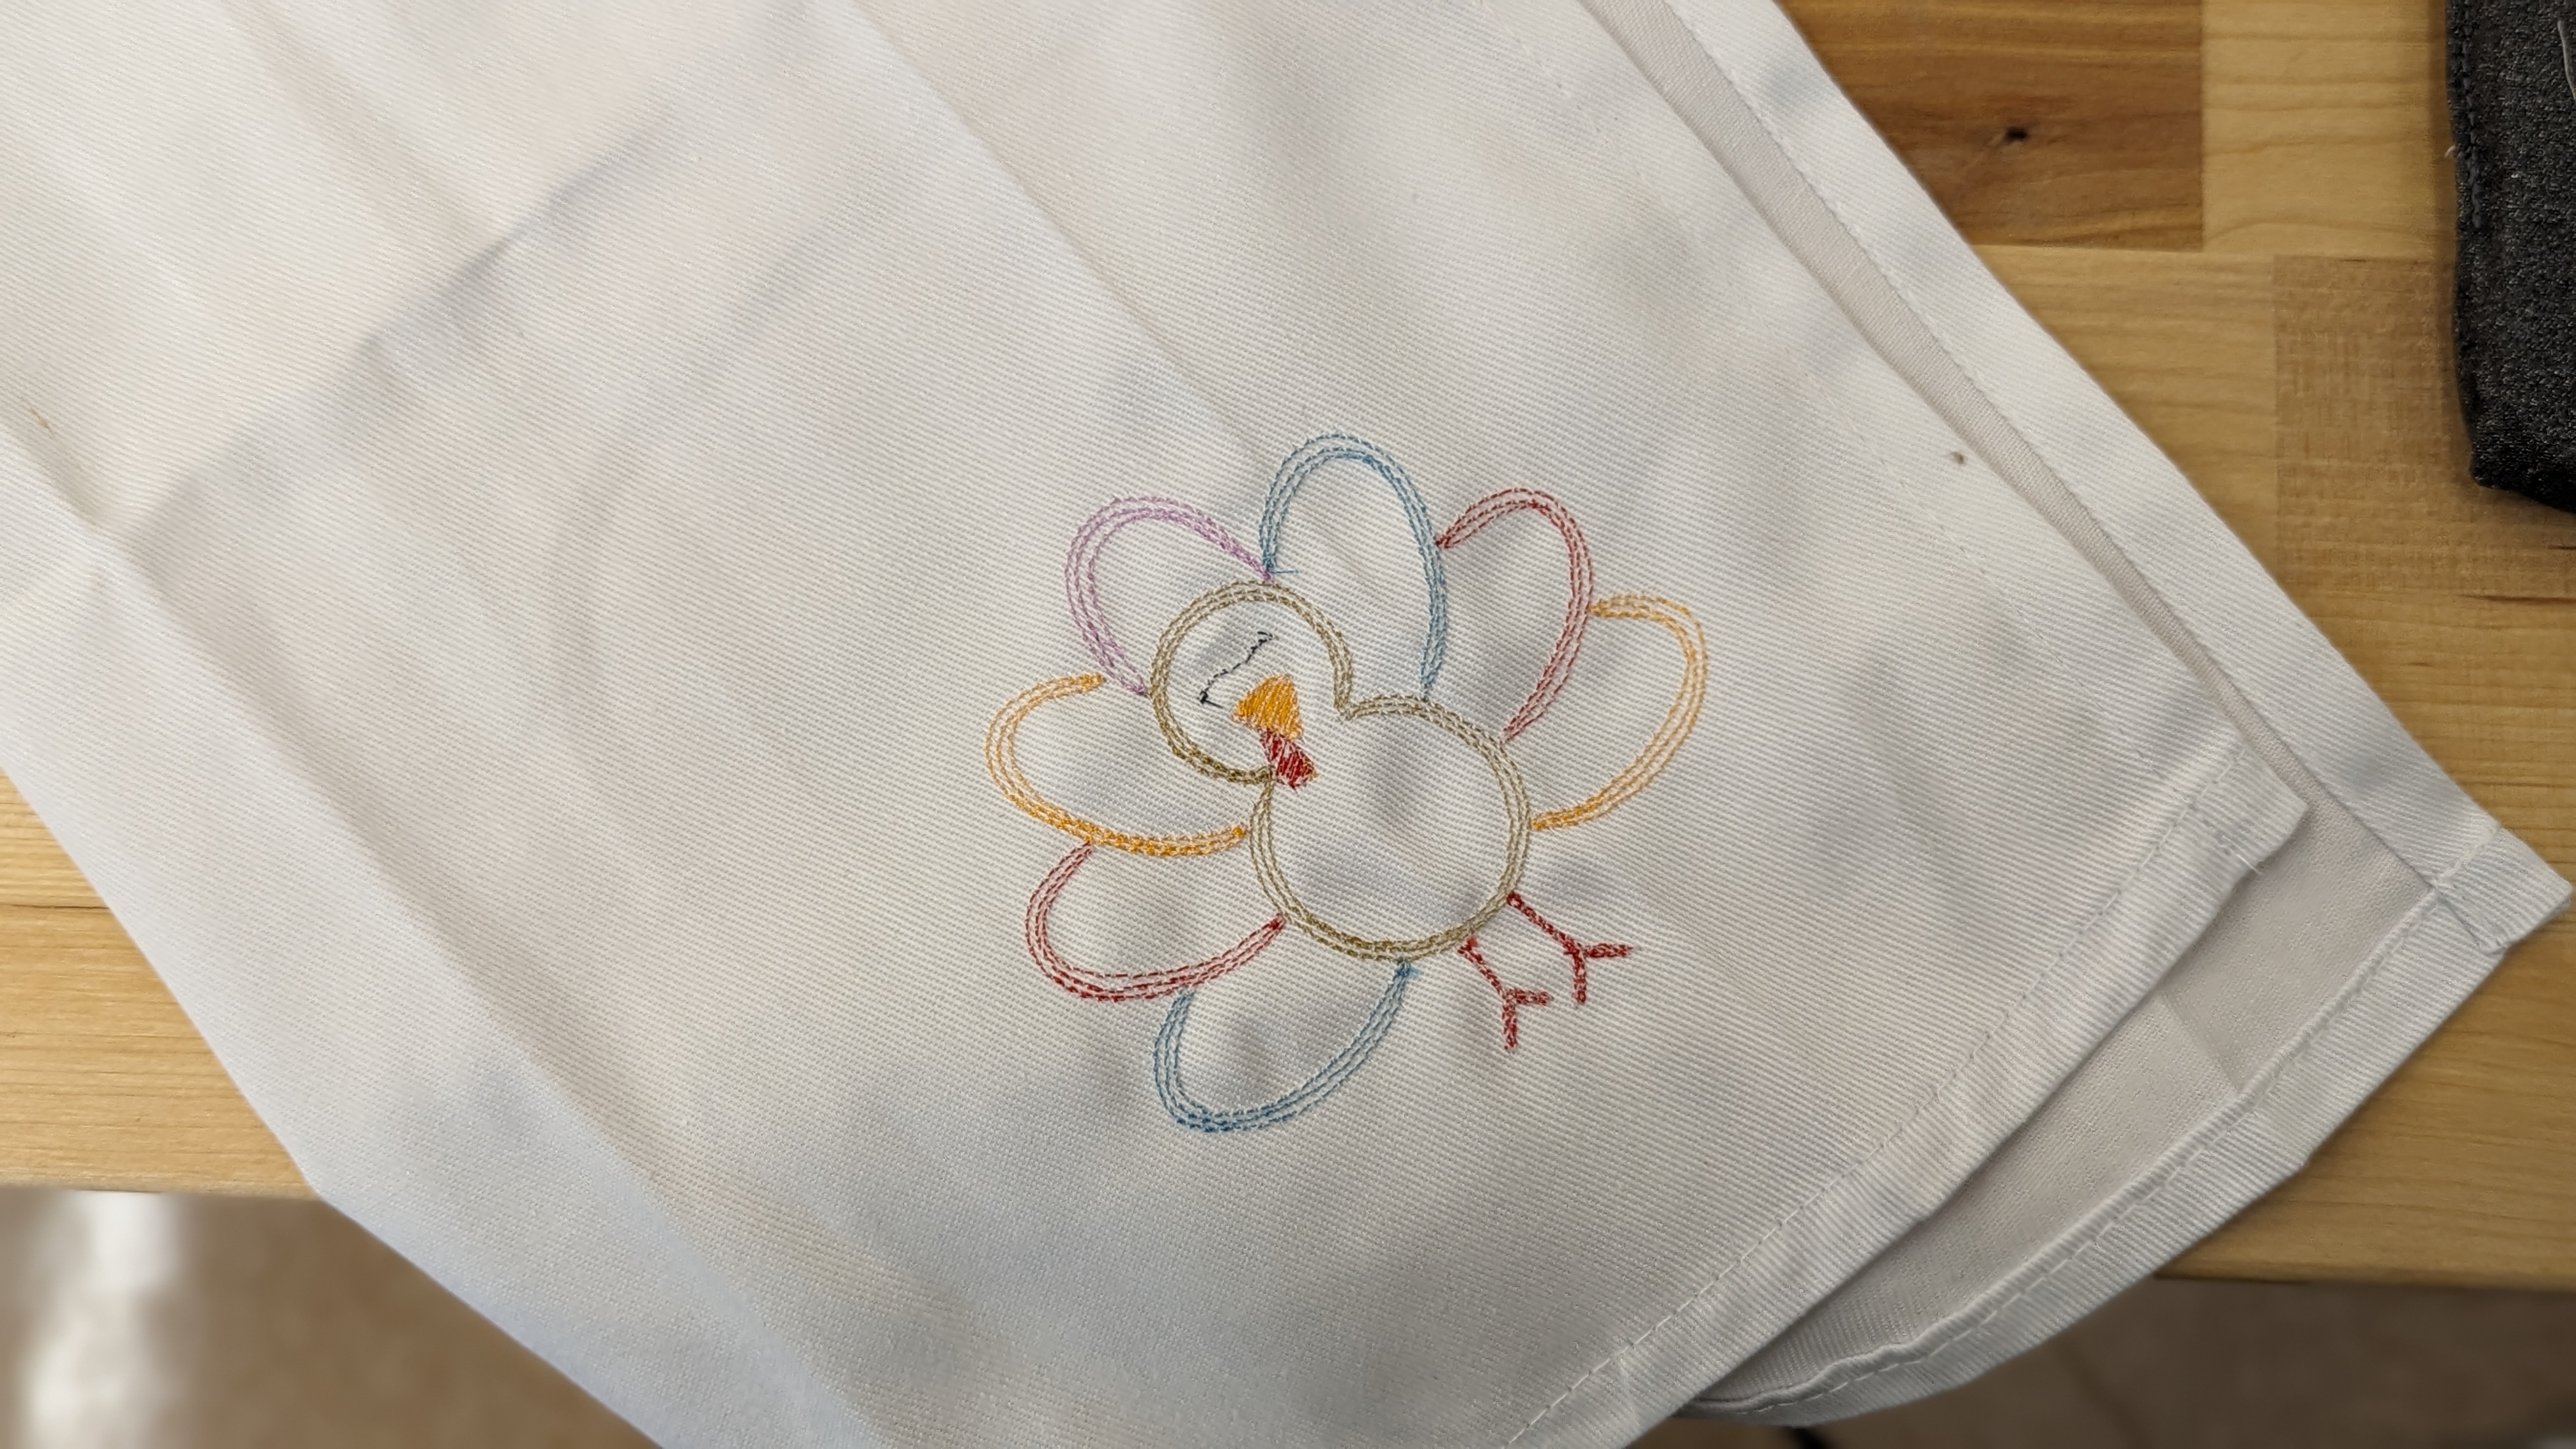 Image of cloth napkin embroidered with a multi-color design in the shape of a turkey